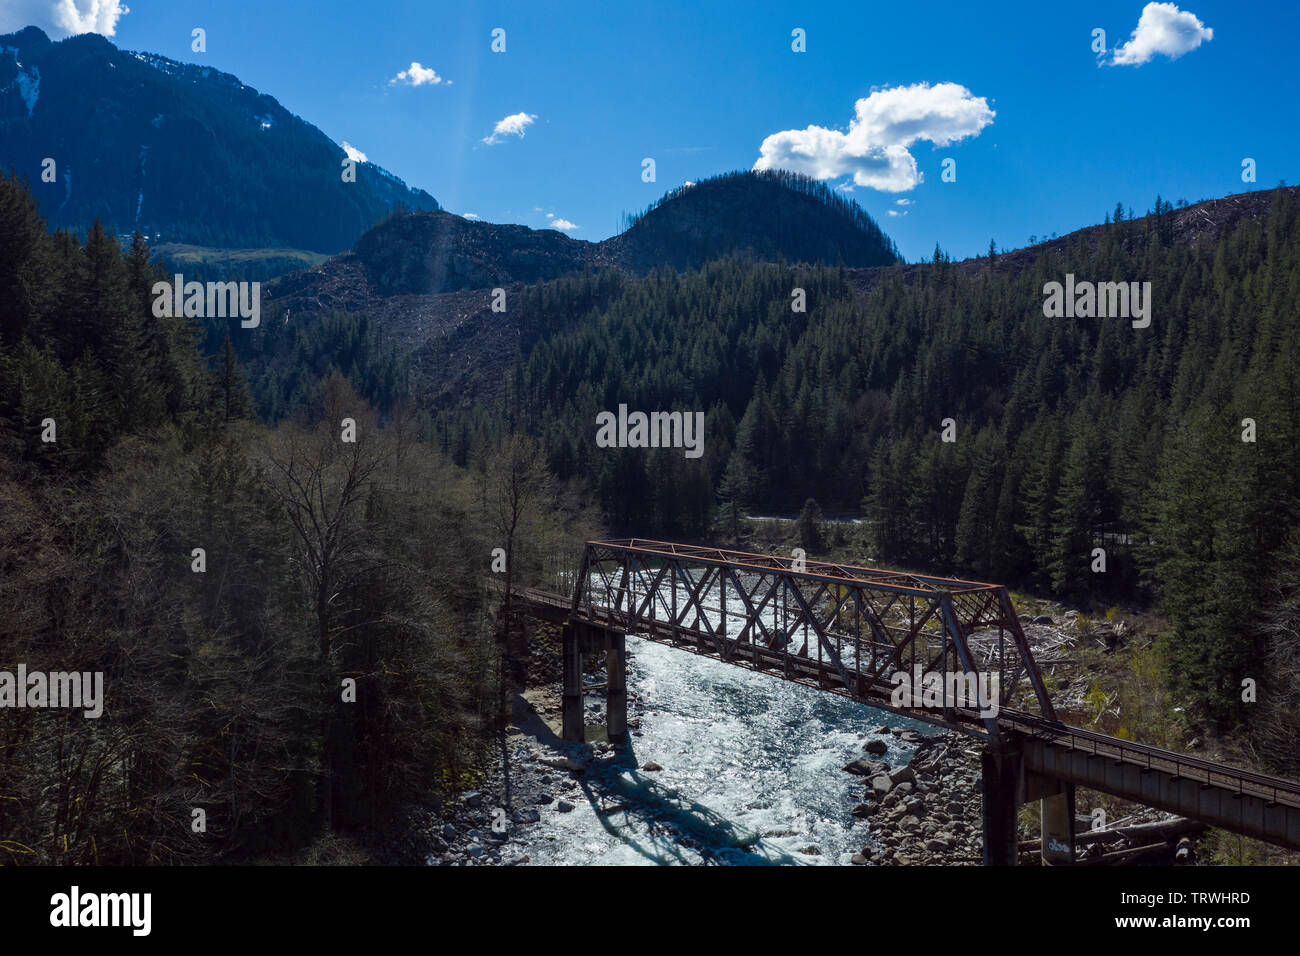 A BNSF train bridge, trestle, spans over the Skykomish river in central Washington state. Stock Photo